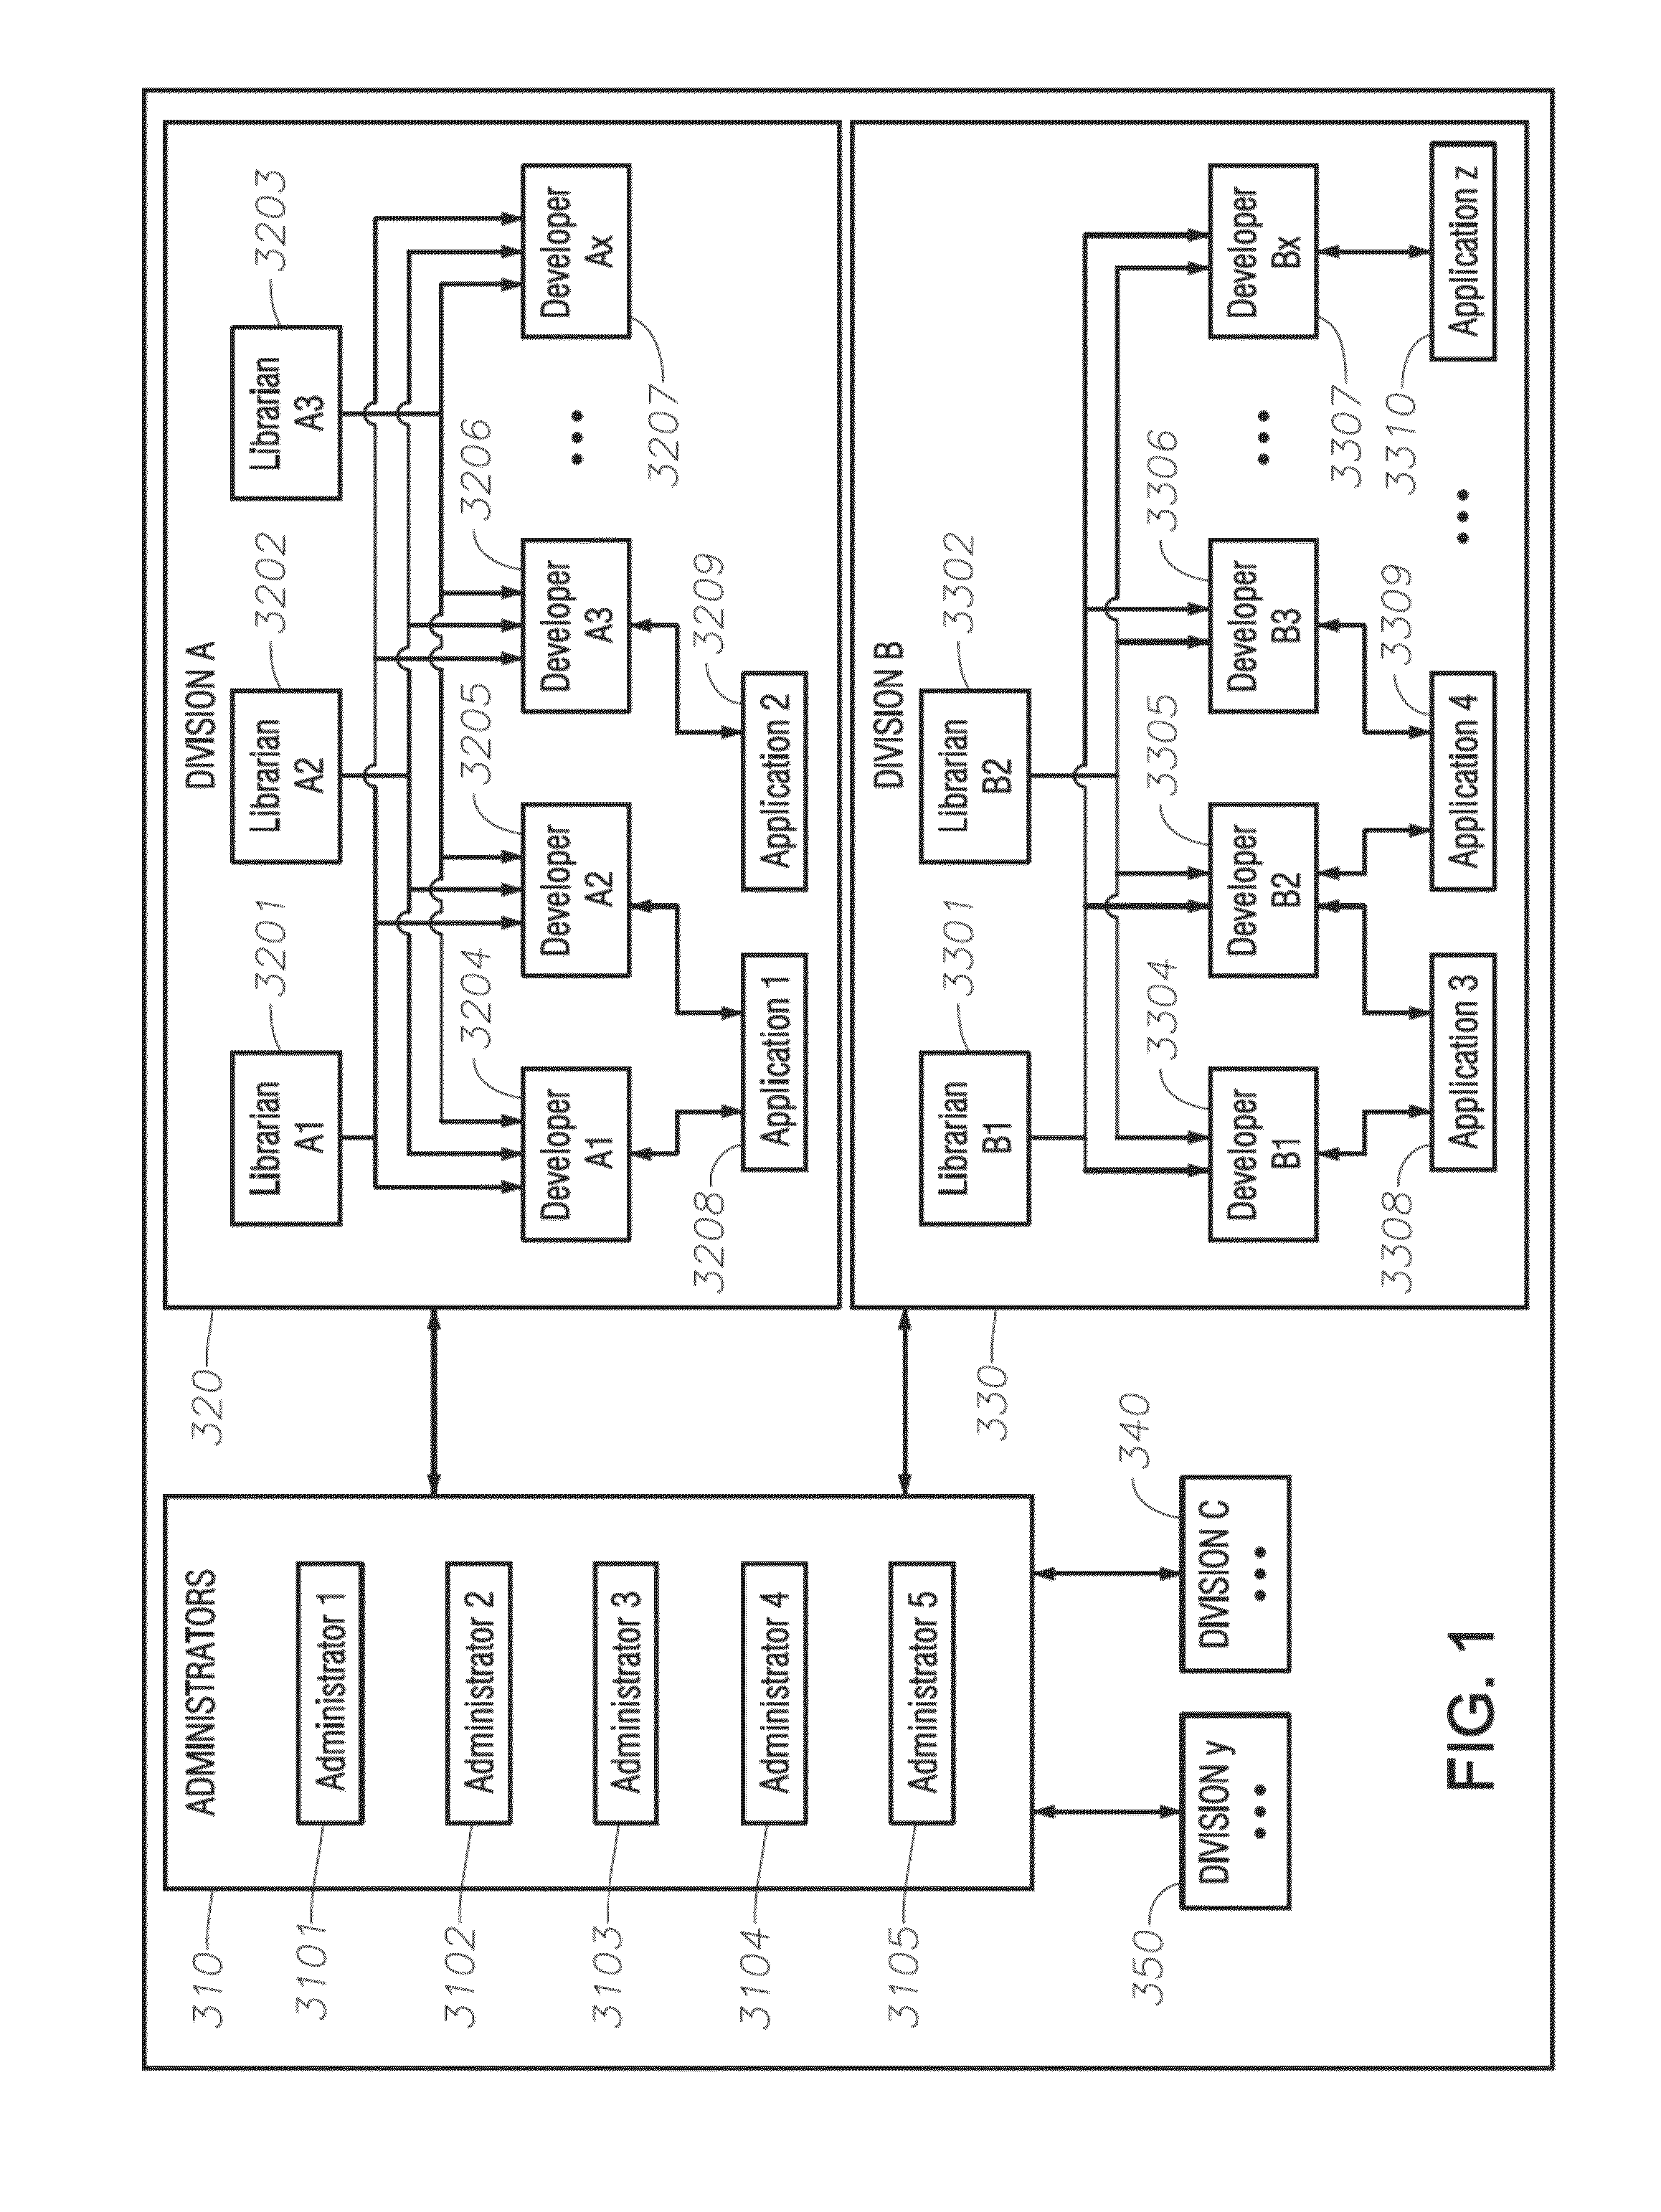 Systems, methods, and computer medium to enhance redeployment of web applications after initial deployment